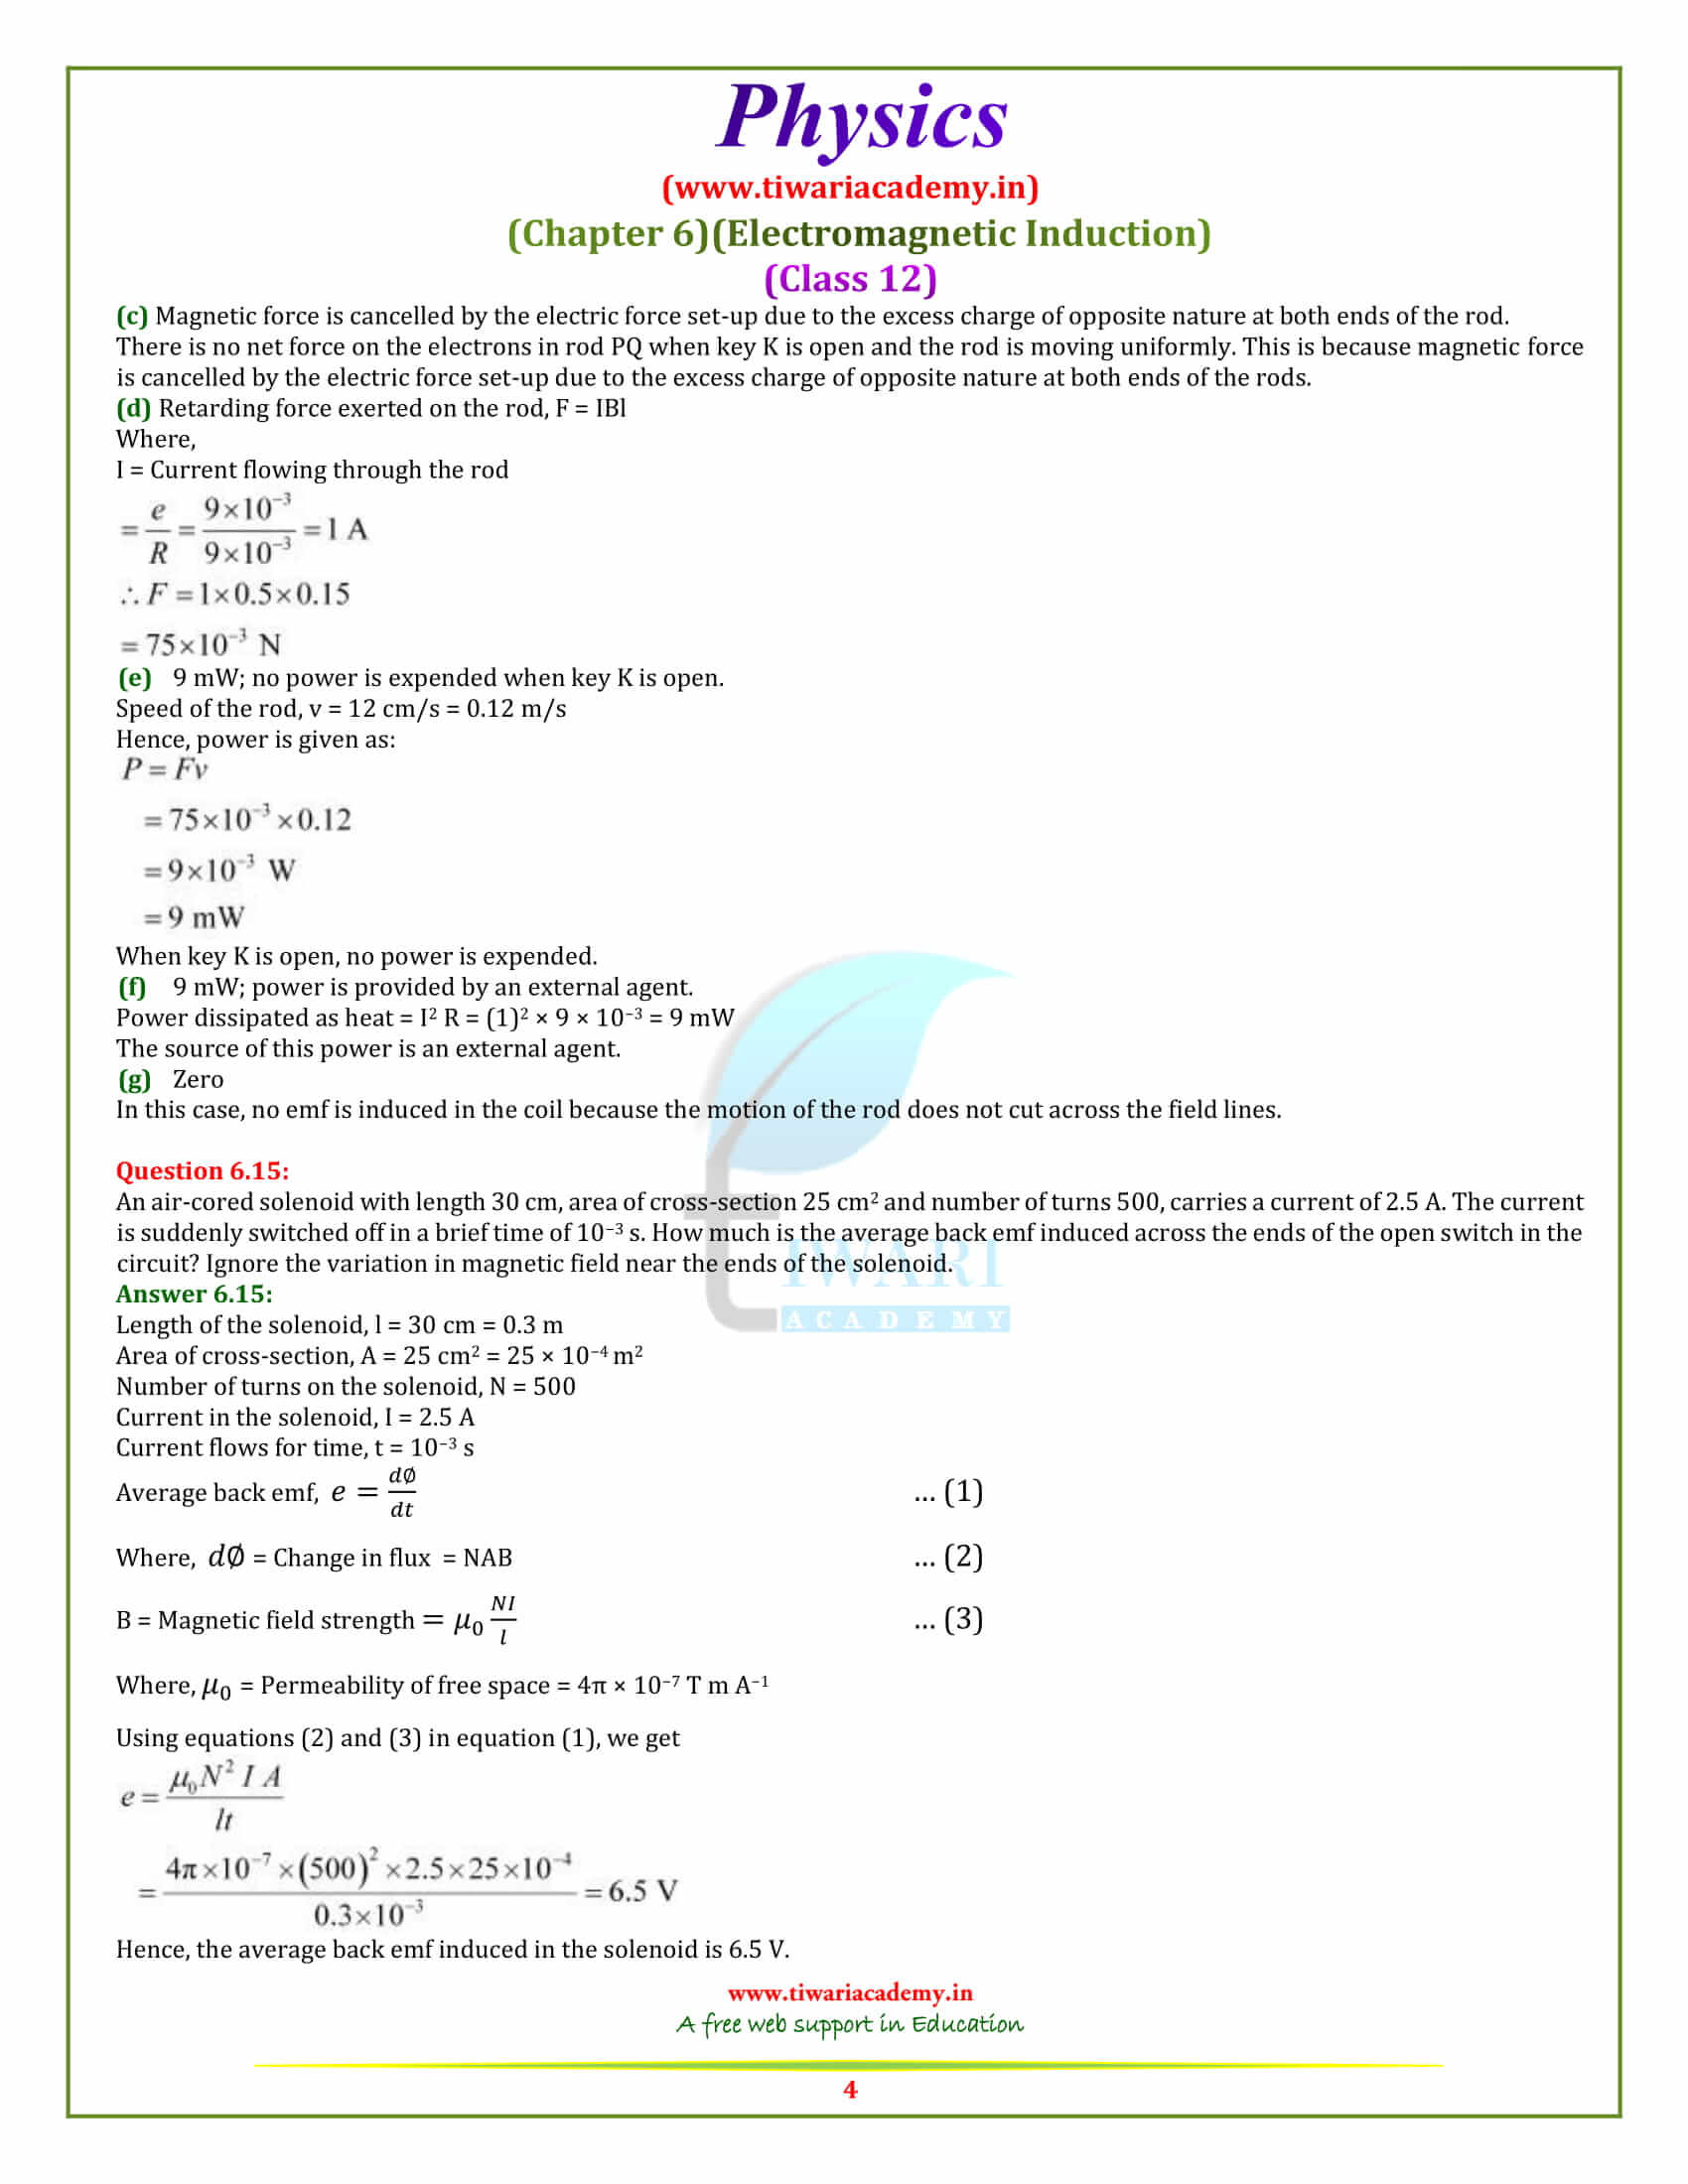 12 Physics Chapter 6 Electromagnetic Induction additional exercises free download